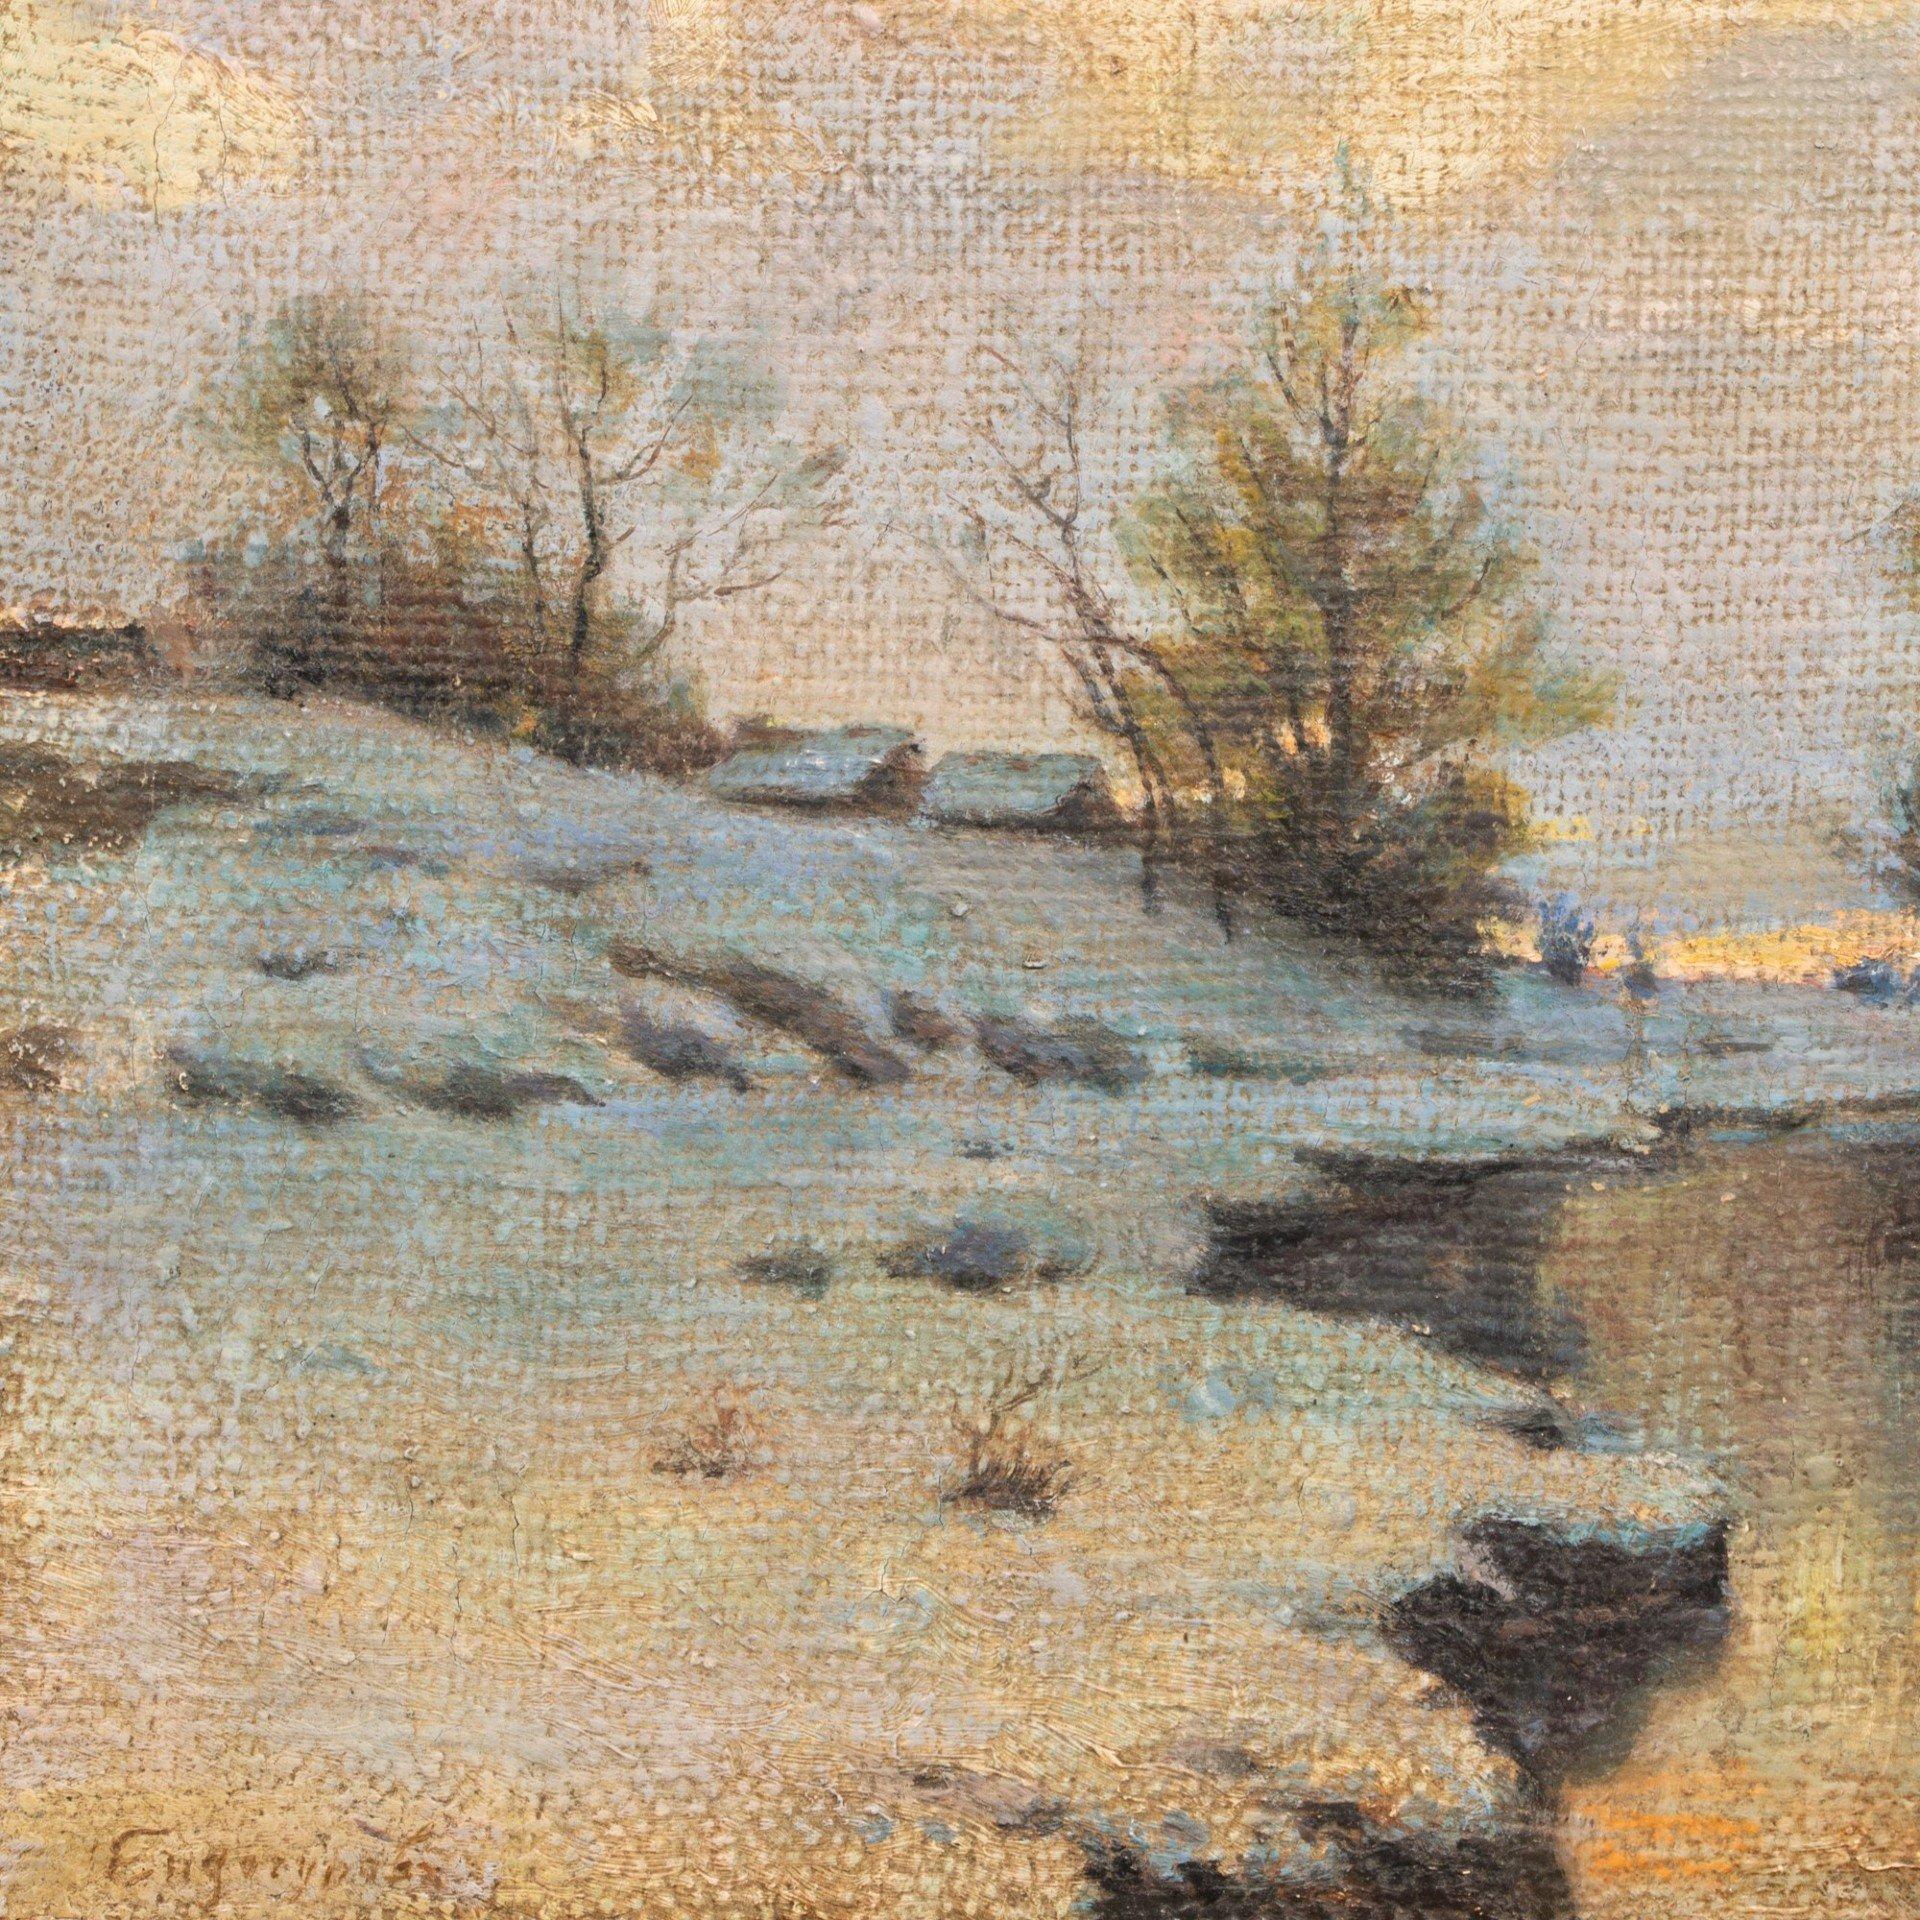 Early spring (Sketch), oil on jute by Endogurov Ivan Ivanovich (1861-1898) For Sale 6